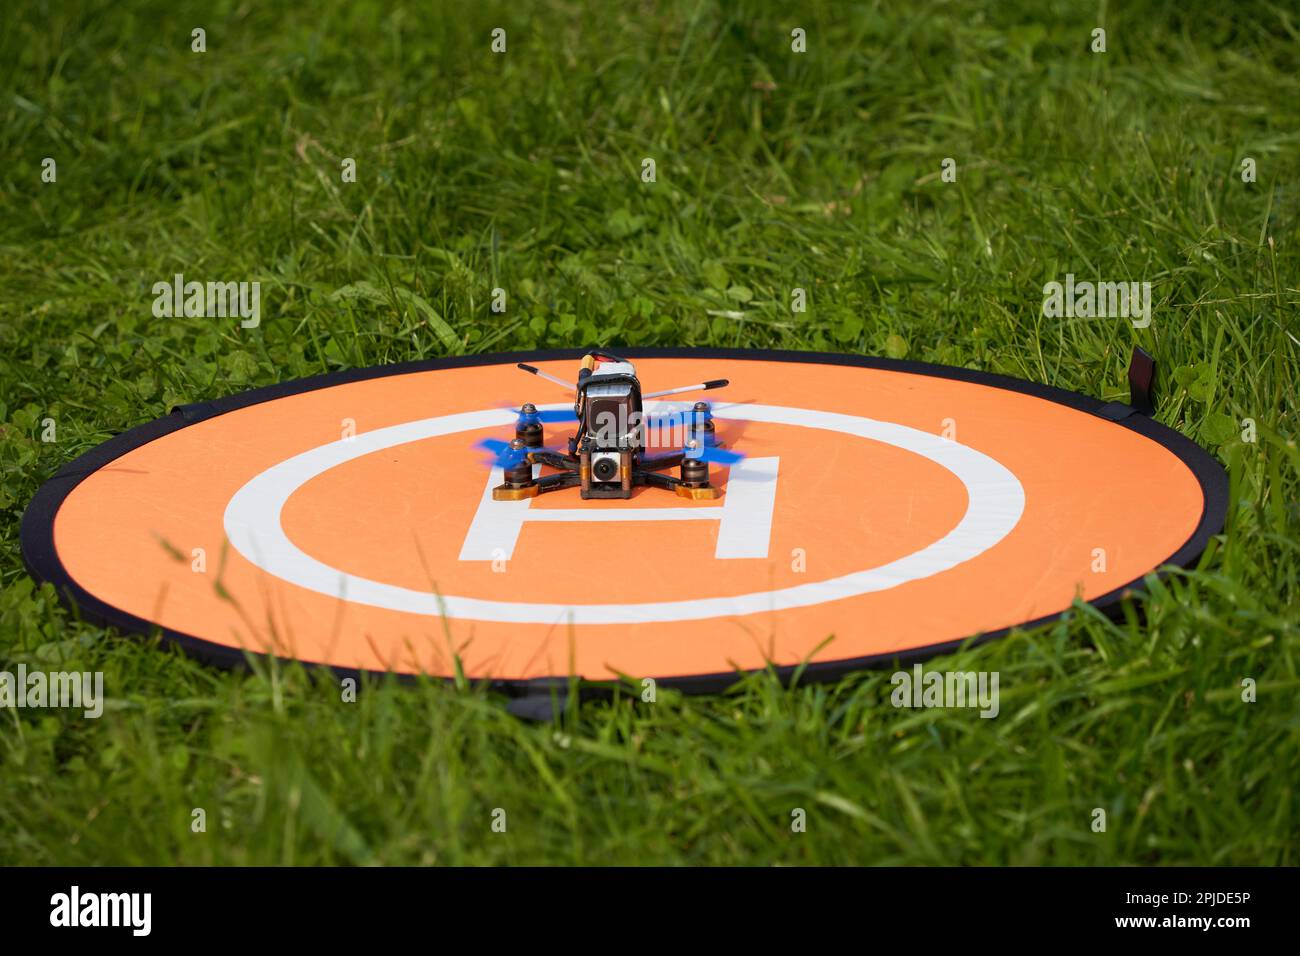 Small quadcopter with blue propellers on an orange landing pad(Landeplatz), which is located in the green meadow. Germany. Stock Photo